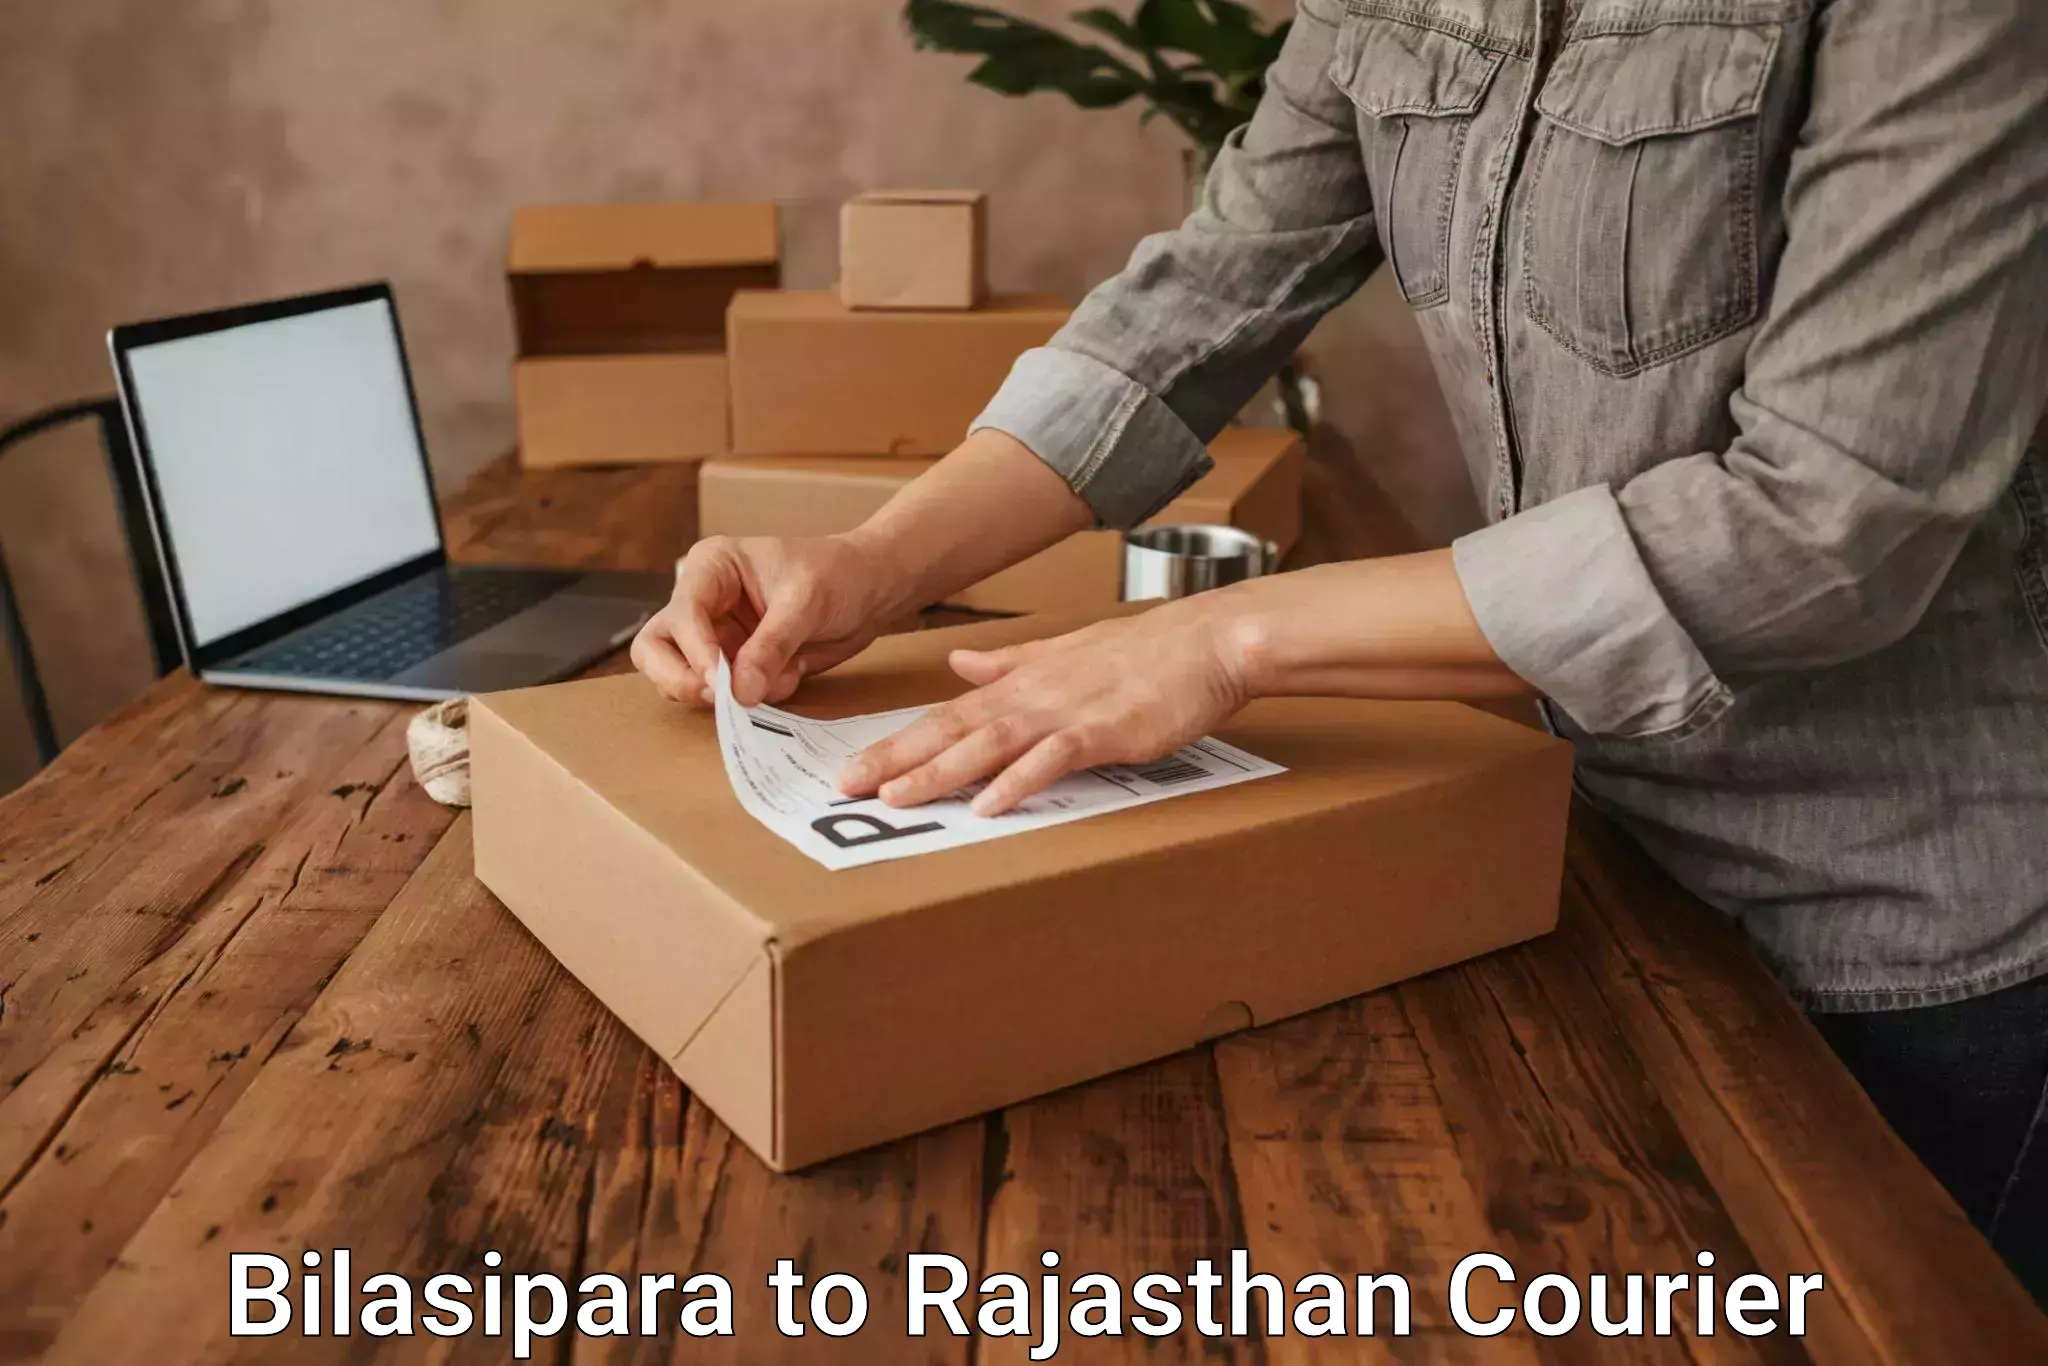 Reliable delivery network Bilasipara to Rajasthan